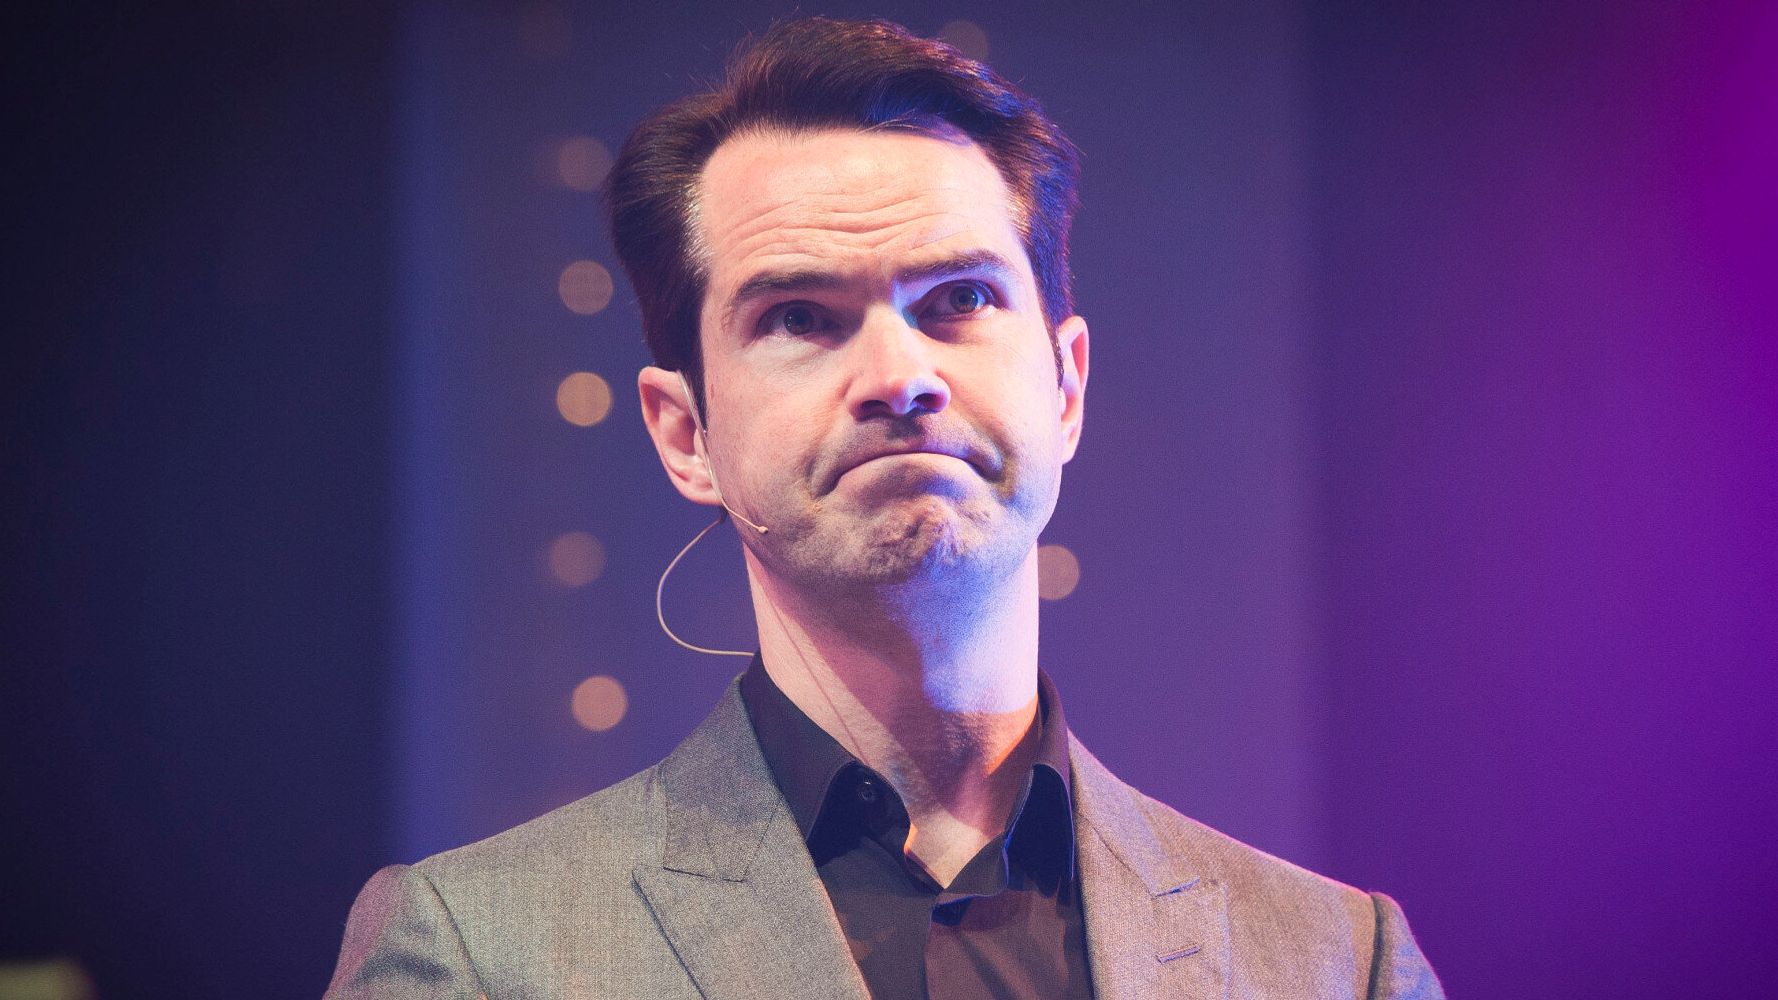 Top Gear': Jimmy Carr Wants Role Alongside Chris Evans On Revamped BBC Motoring Show HuffPost UK Entertainment